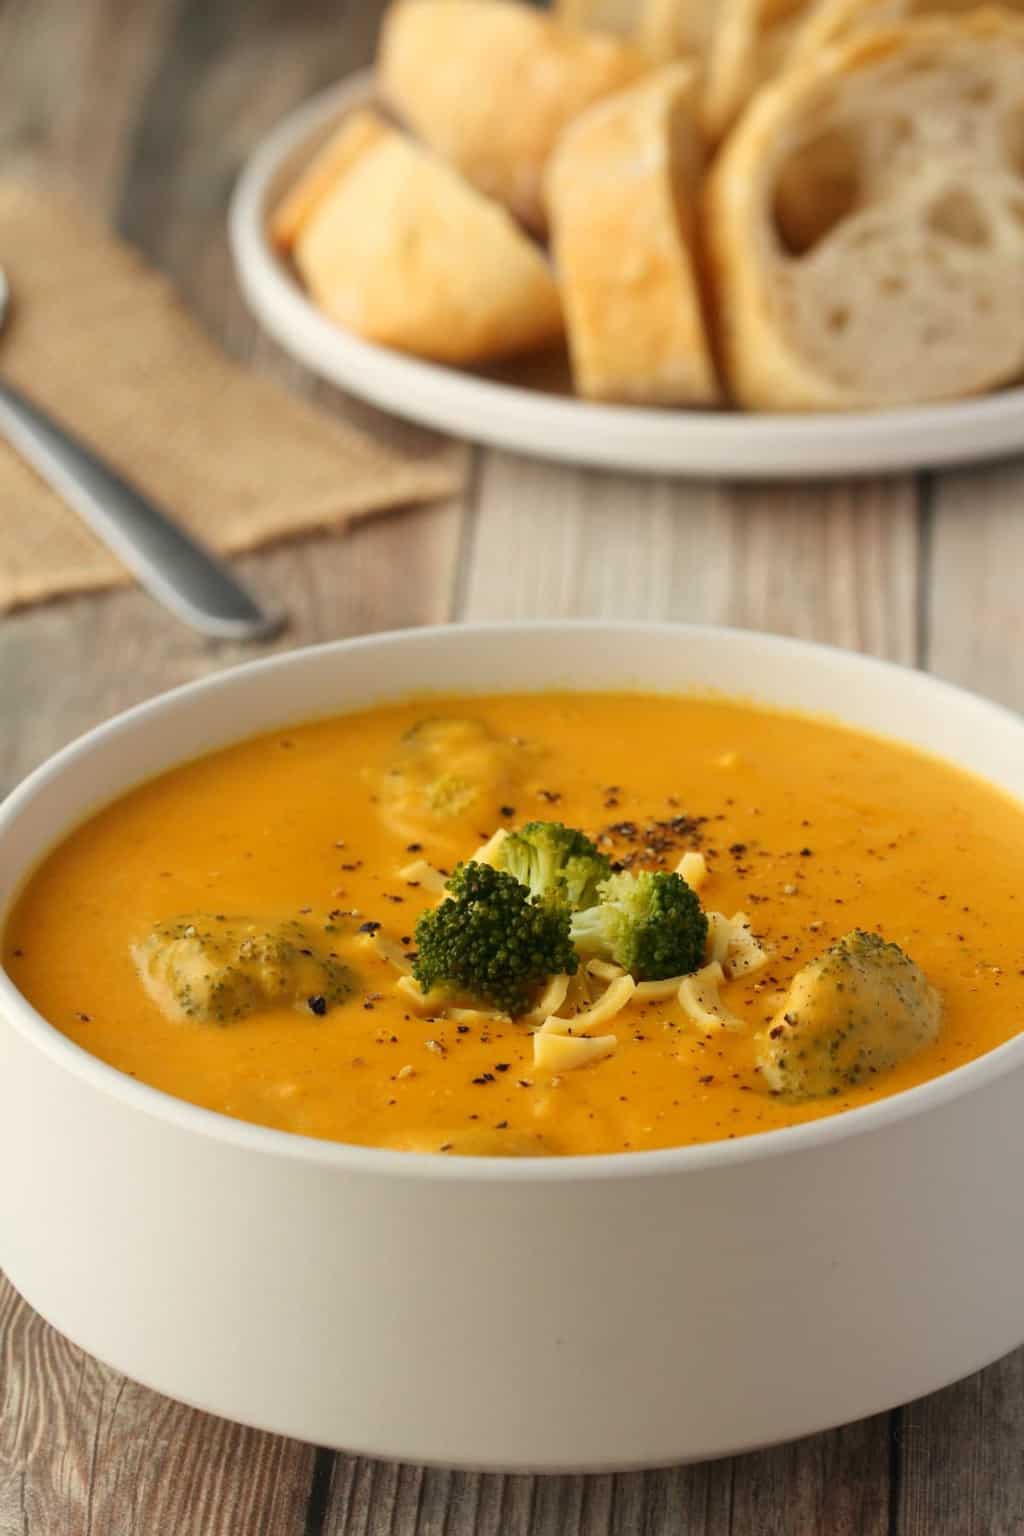 Vegan Broccoli Cheese Soup – Rich and Cheesy!